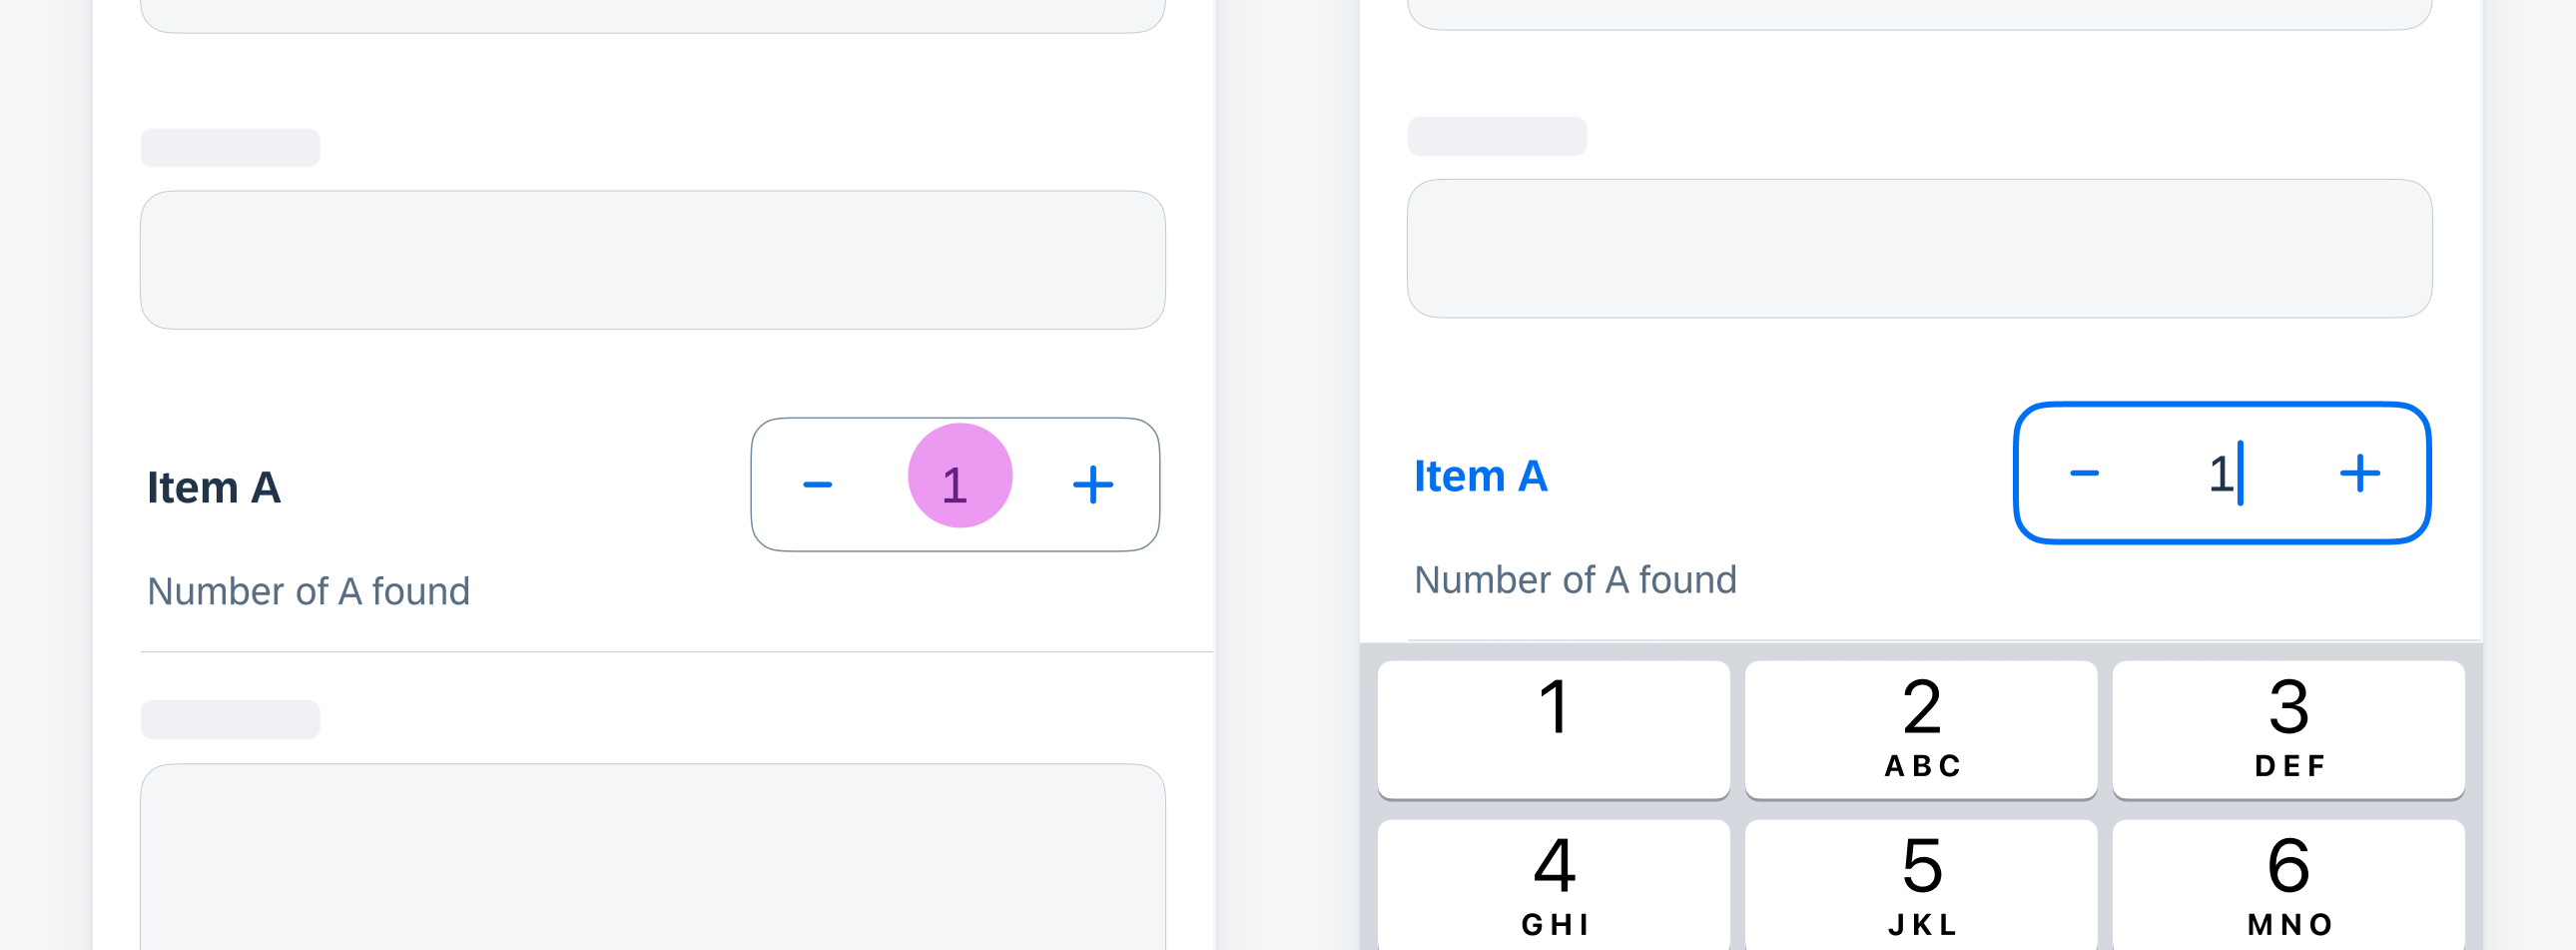 Tap the value/input field to trigger keyboard to enter selected value